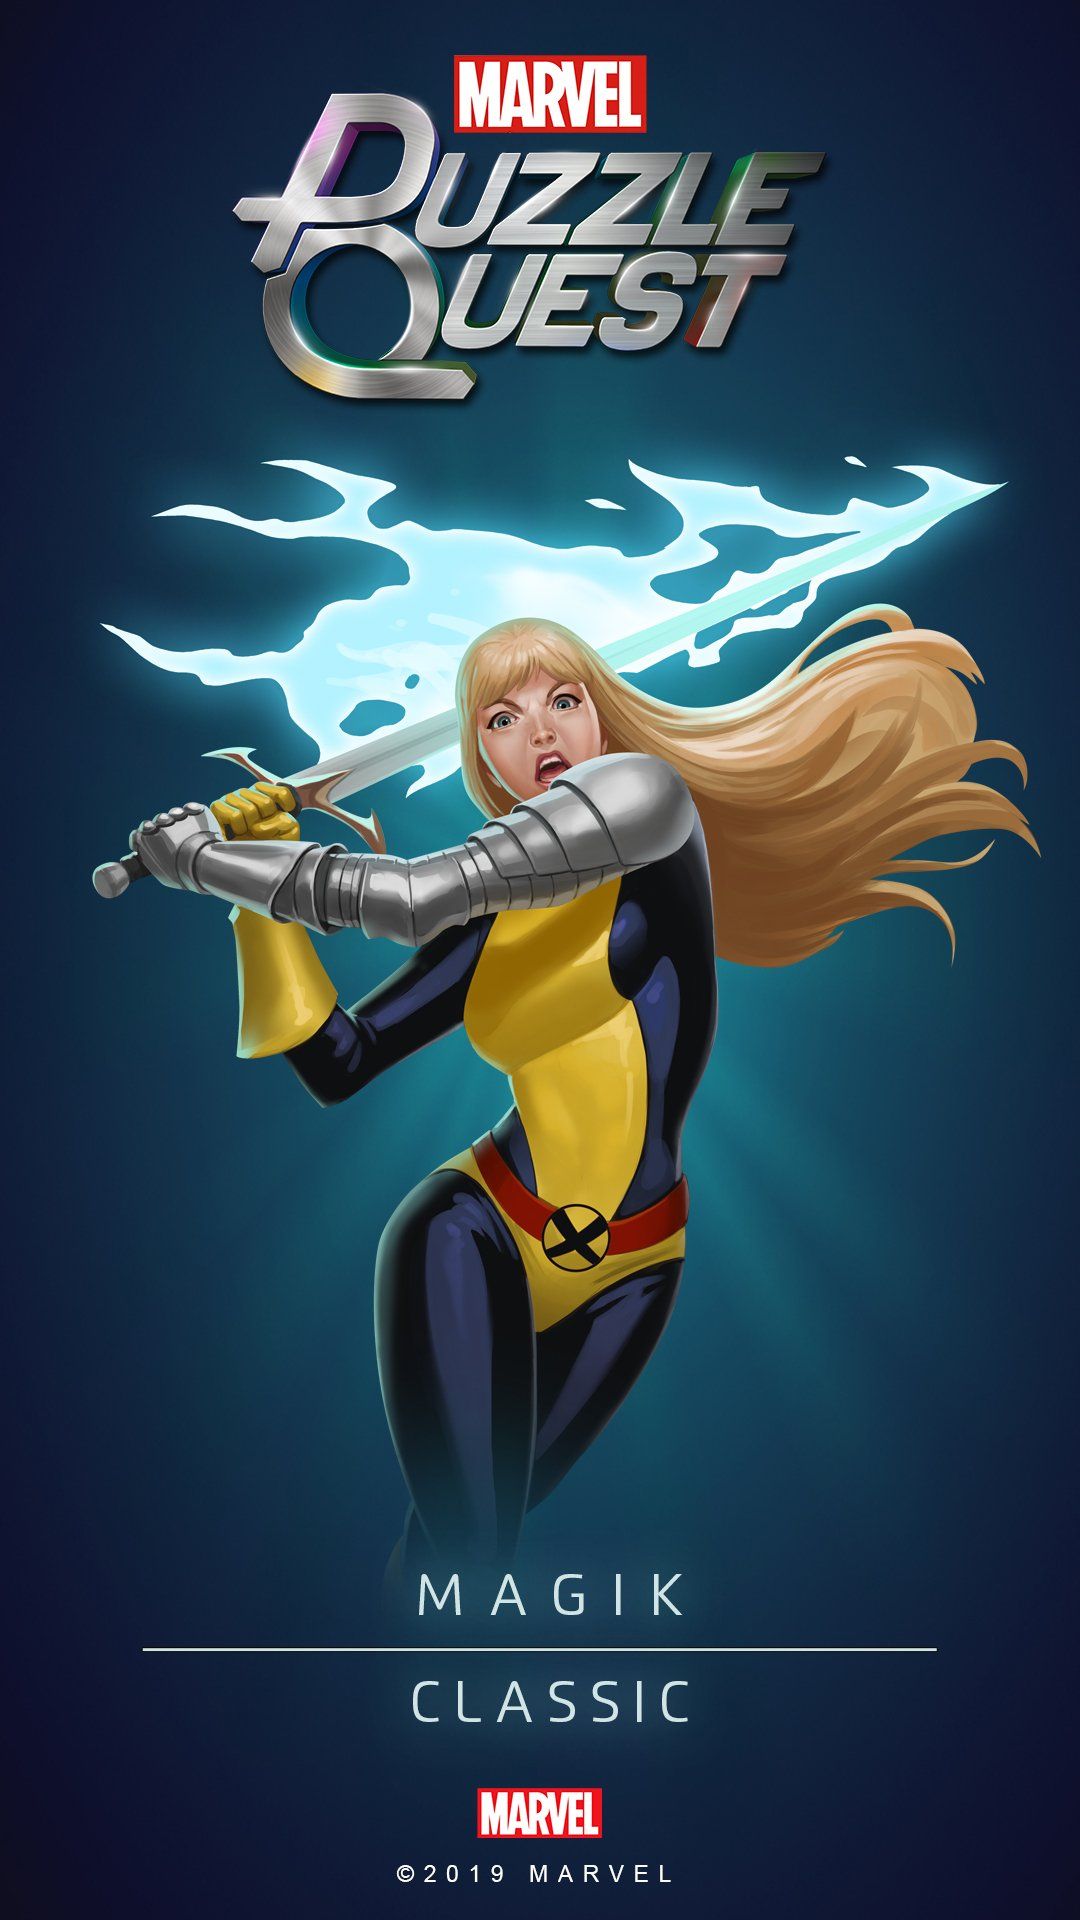 Marvel Puzzle Quest your free #MarvelPuzzleQuest wallpaper featuring Magik, the Ruler of Limbo!